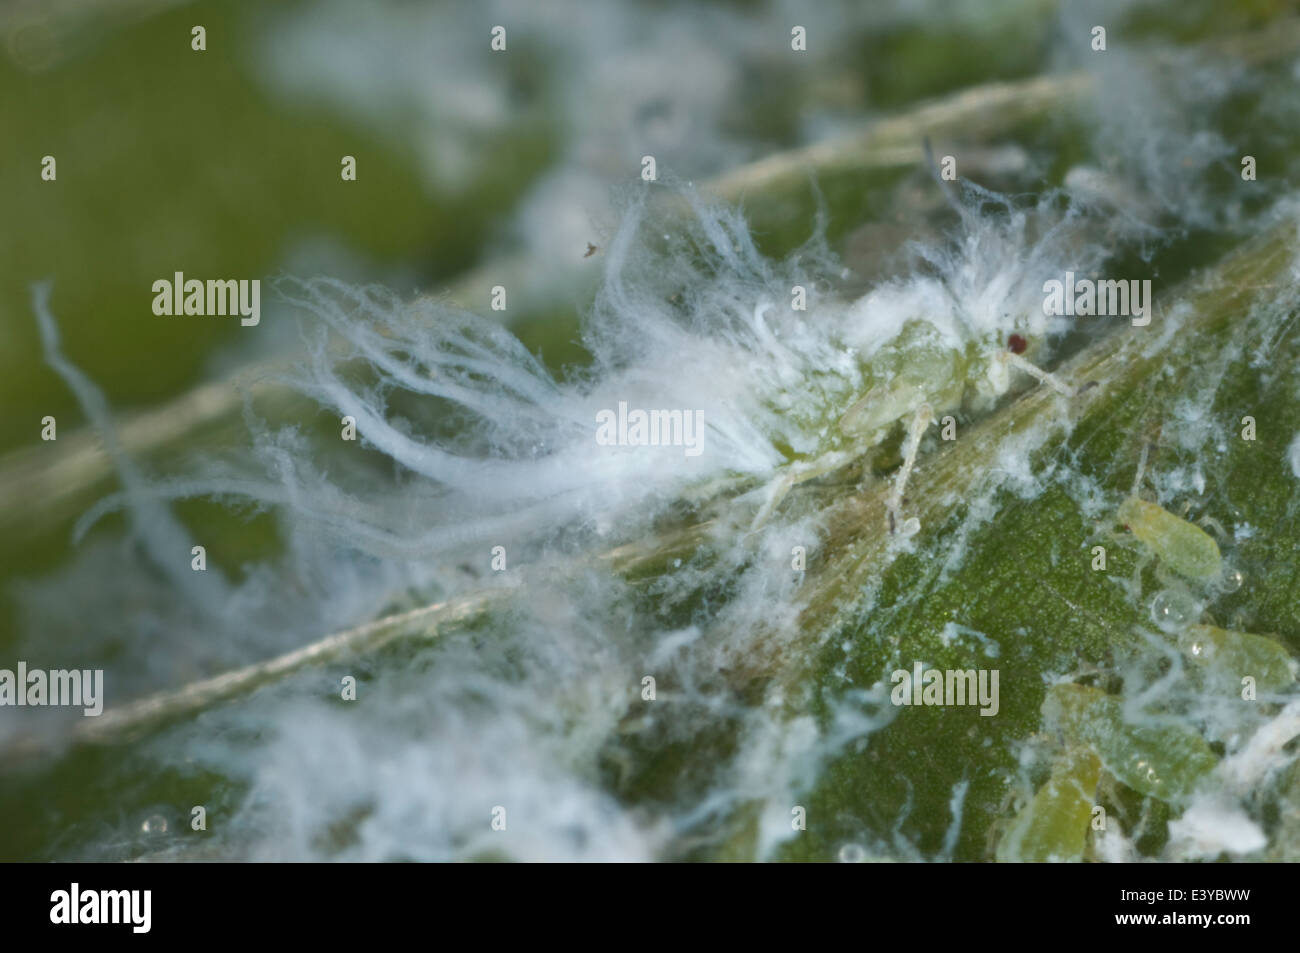 Photomicrograph of a woolly beech aphid, Phyllaphis fagi, colony on the underside of young beech hedge leaves Stock Photo